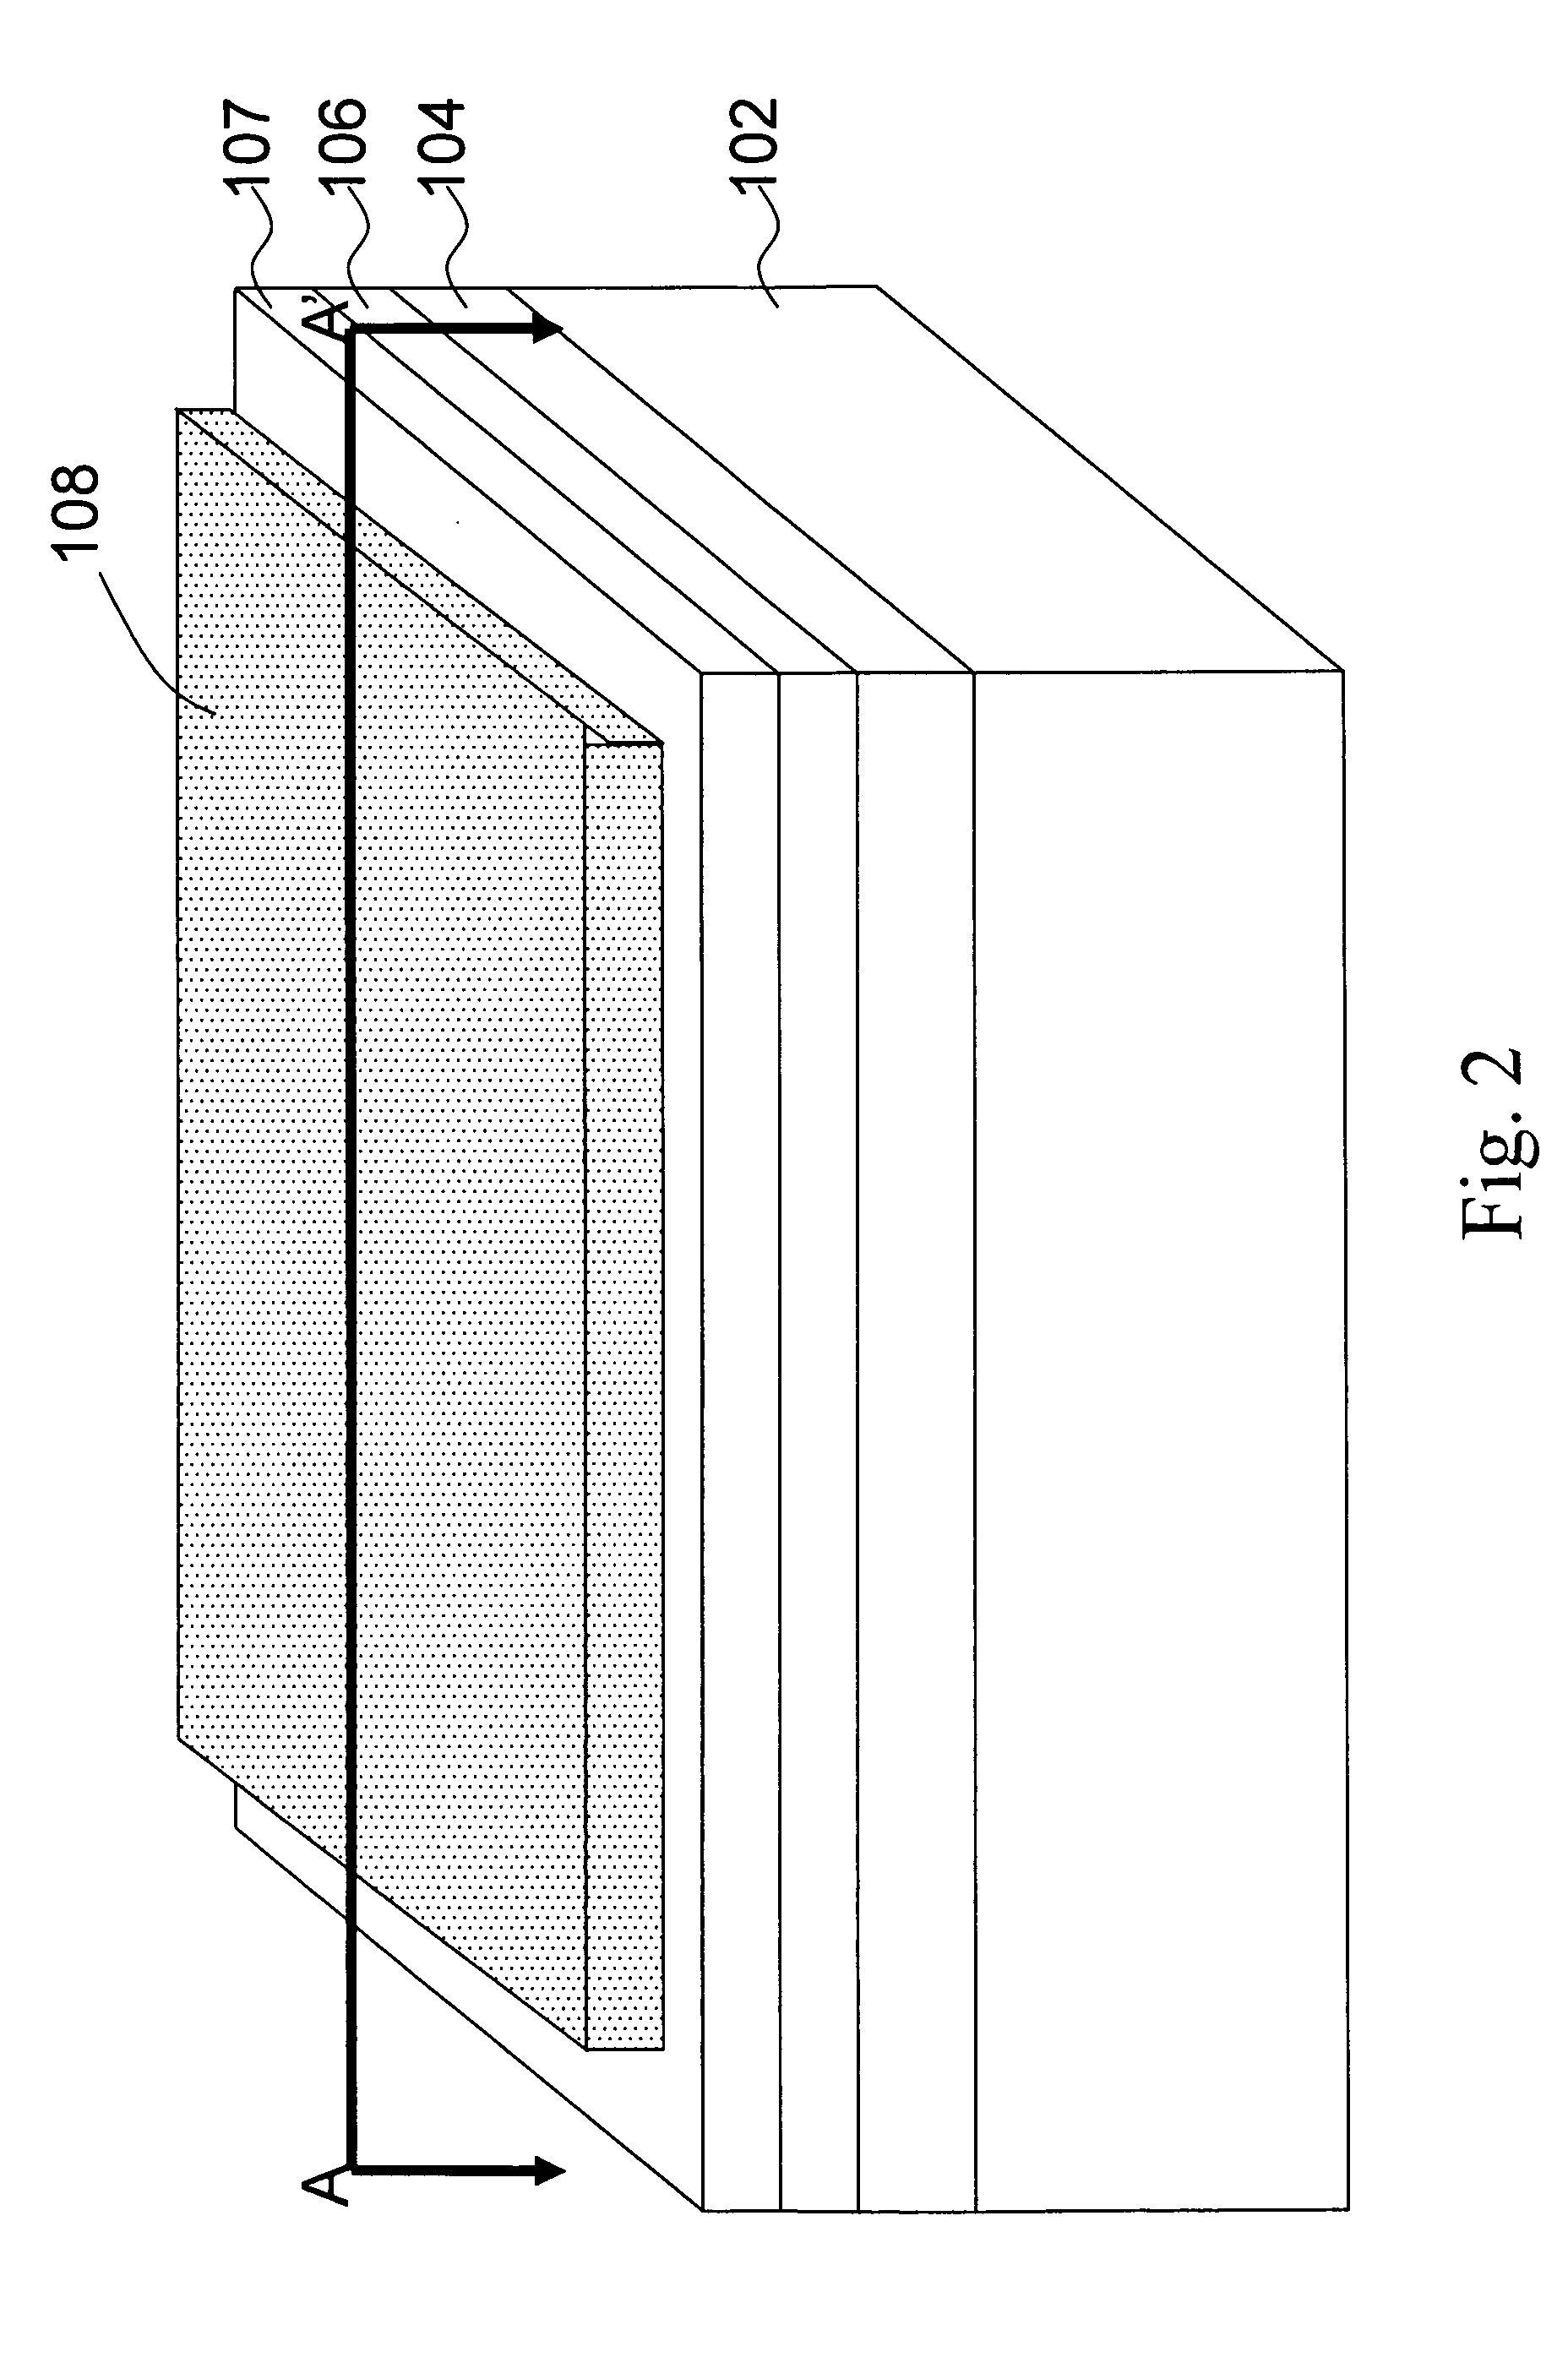 Method for enhancing electrical injection efficiency and light extraction efficiency of light-emitting devices